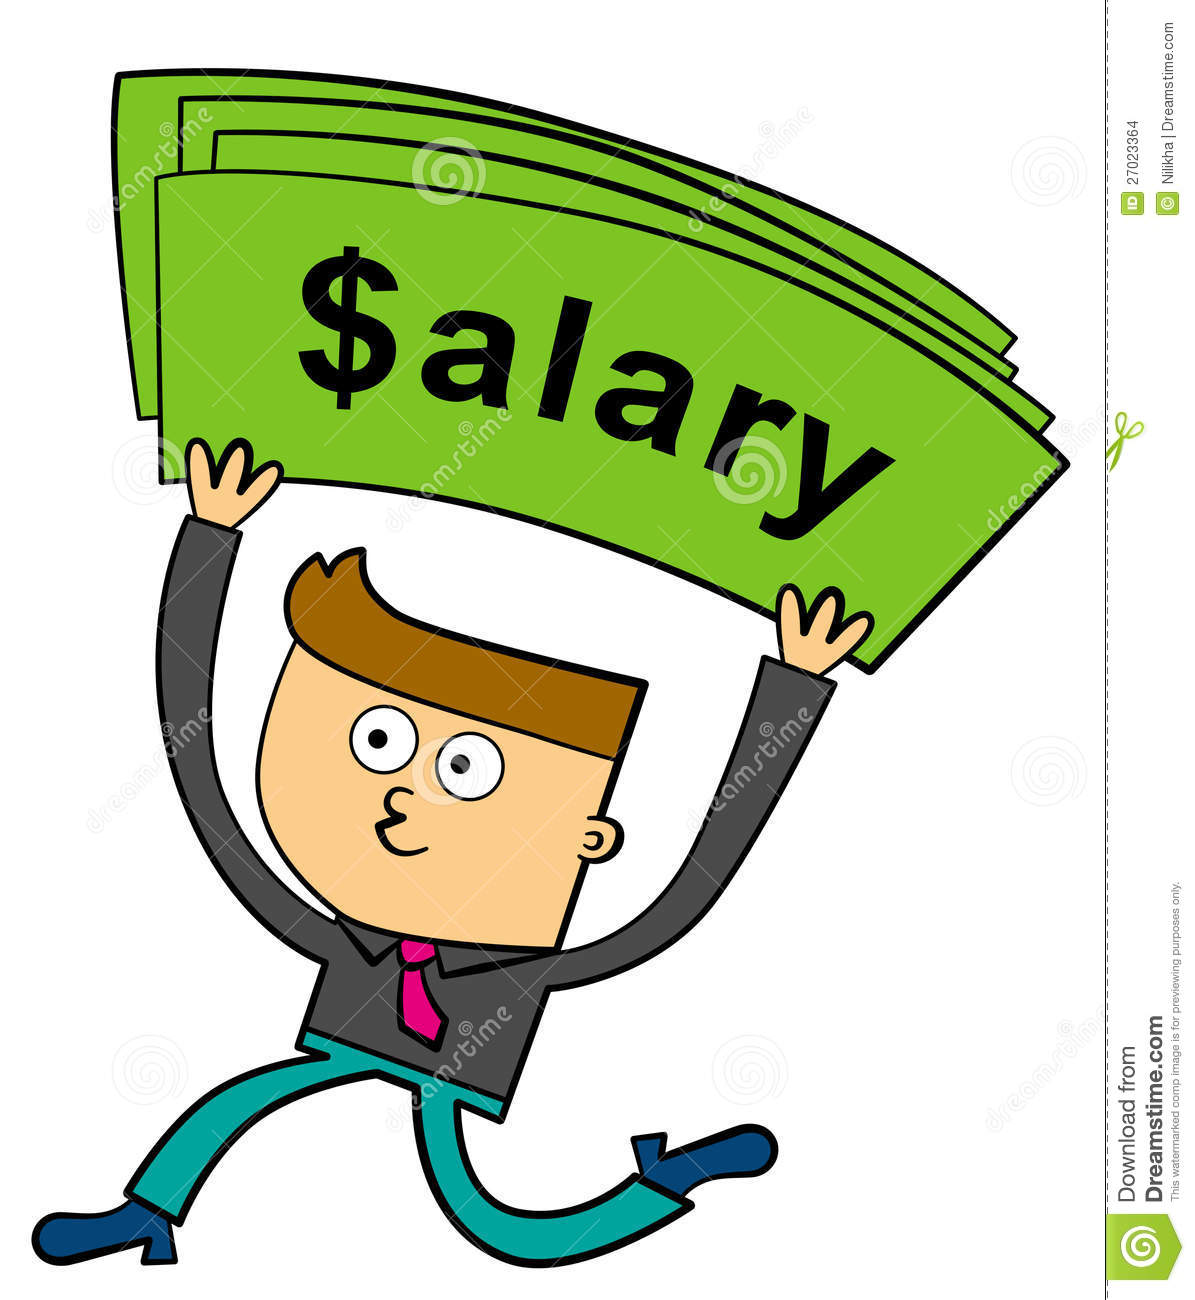 clipart of earnings - photo #17